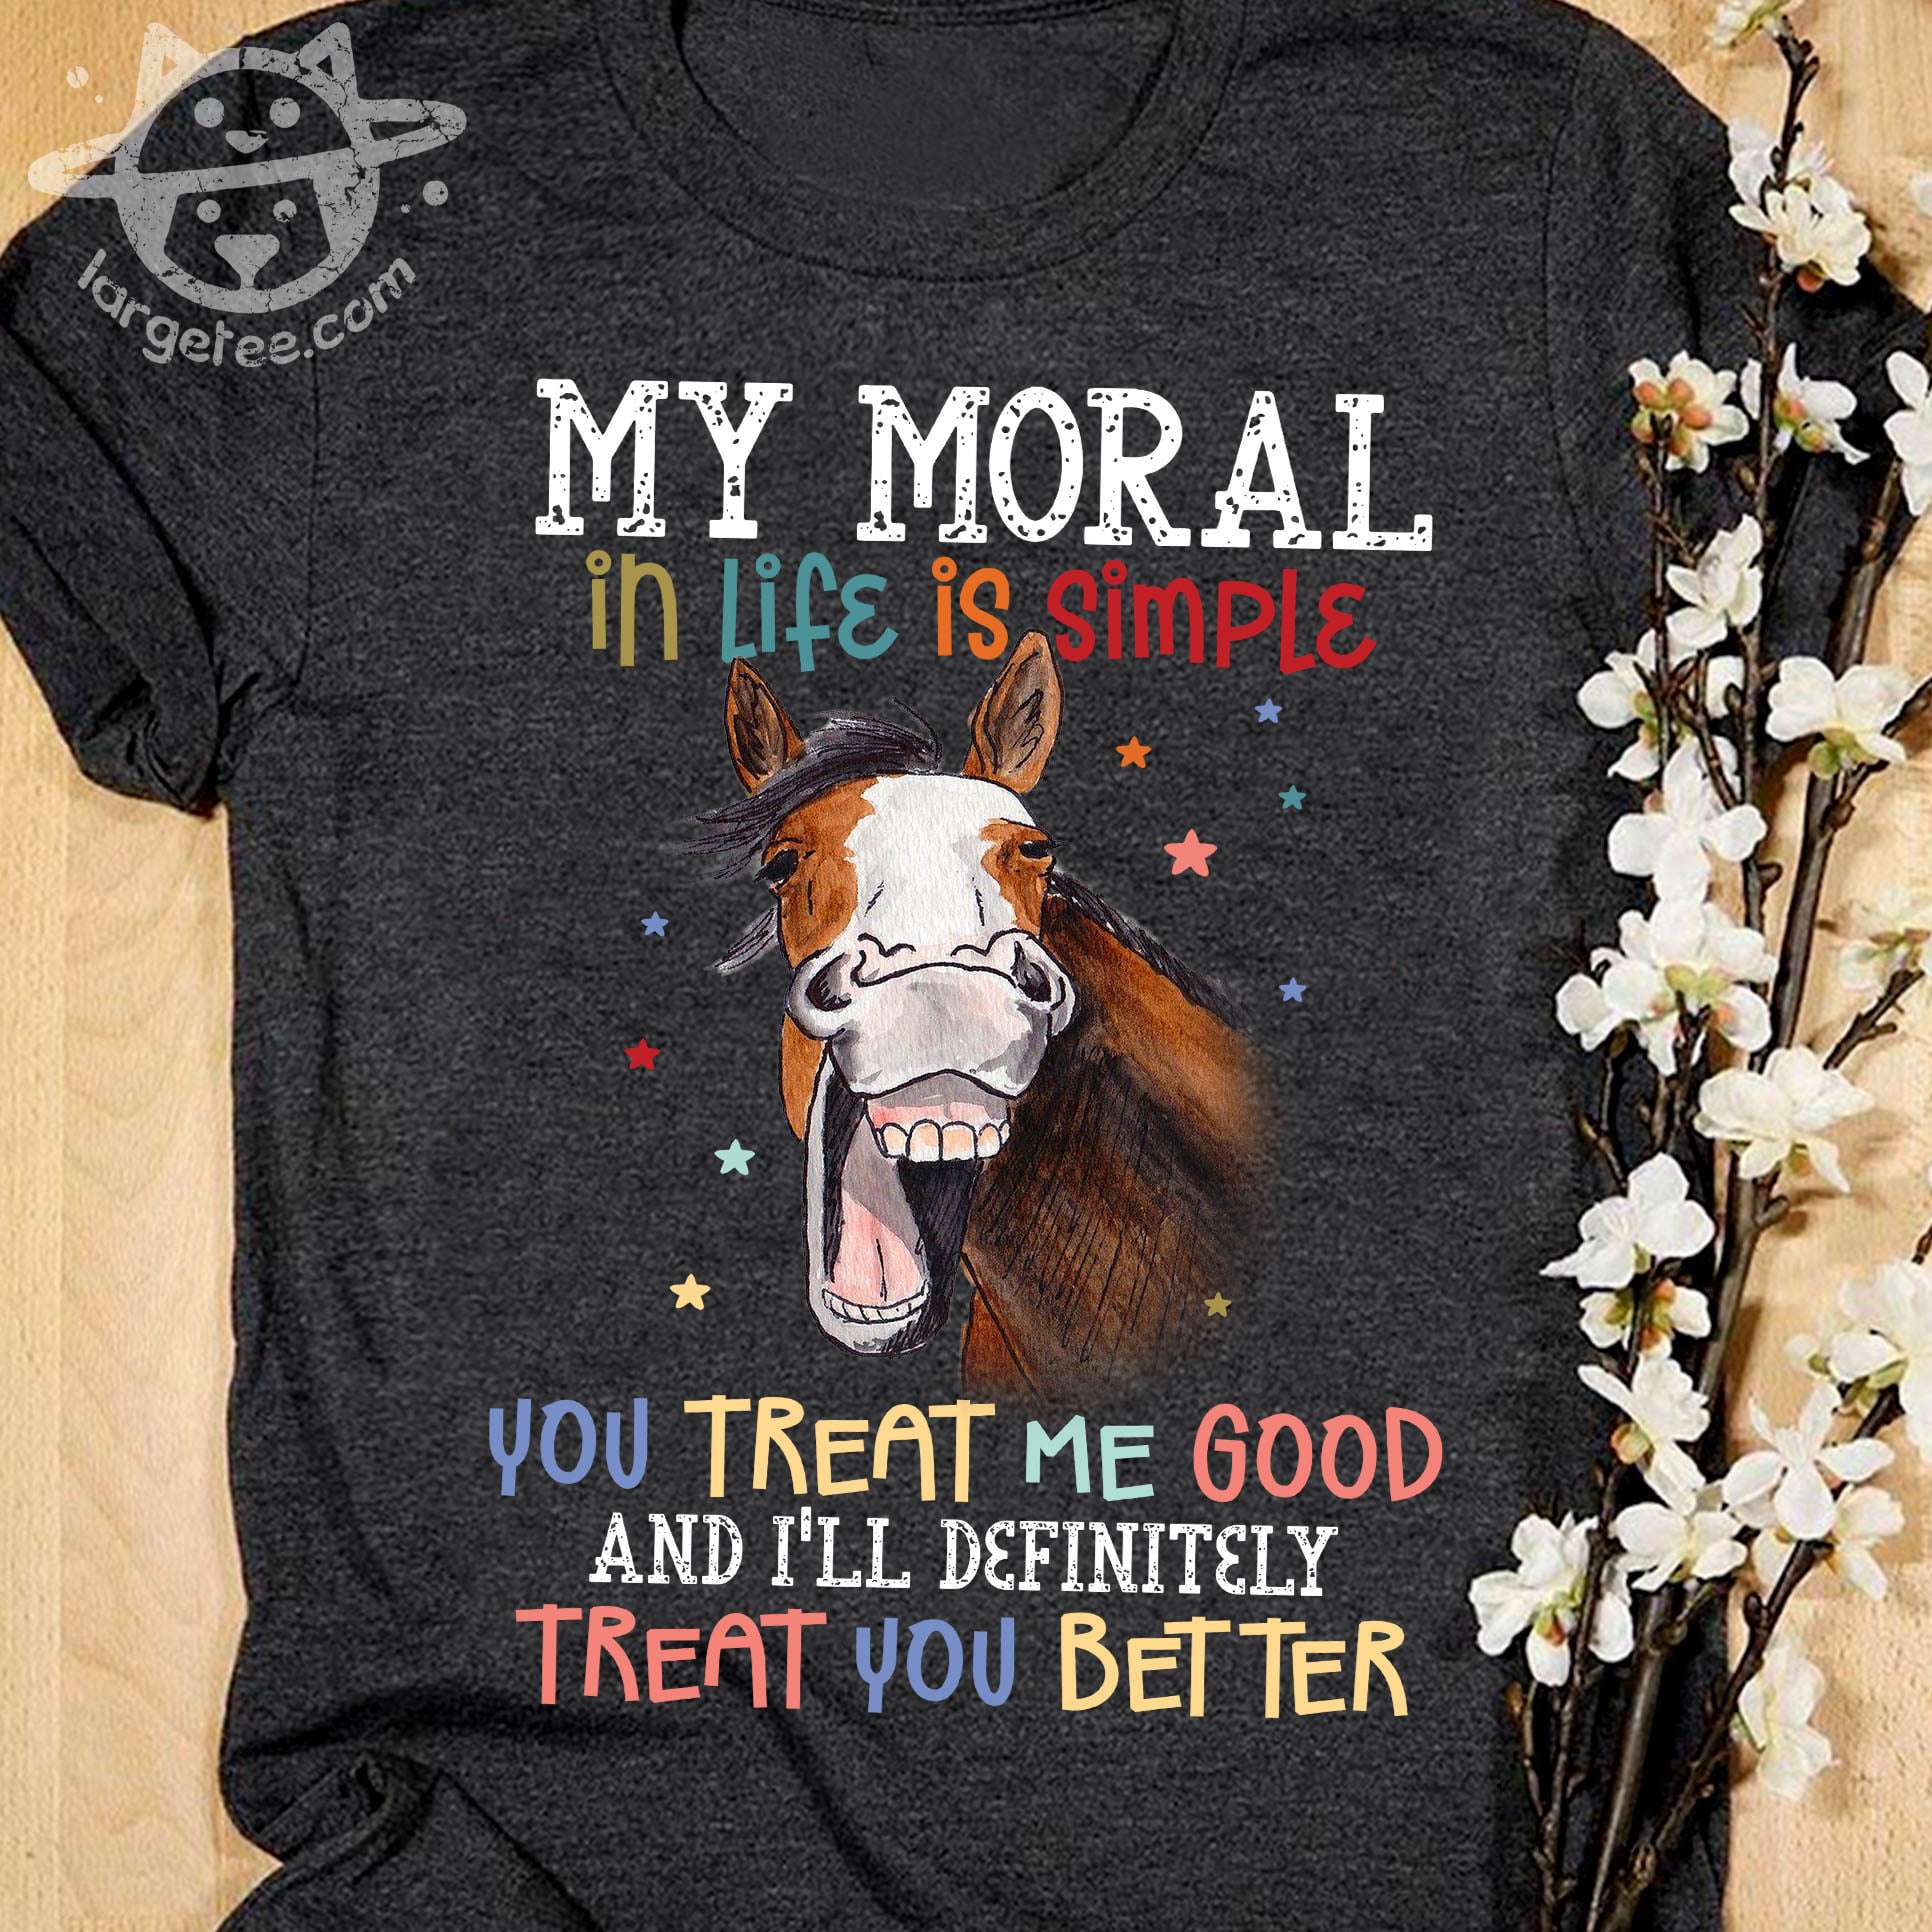 Funny Horse Graphic T-shirt - My moral in life is simple you treat me good and i'll definitely treat you better